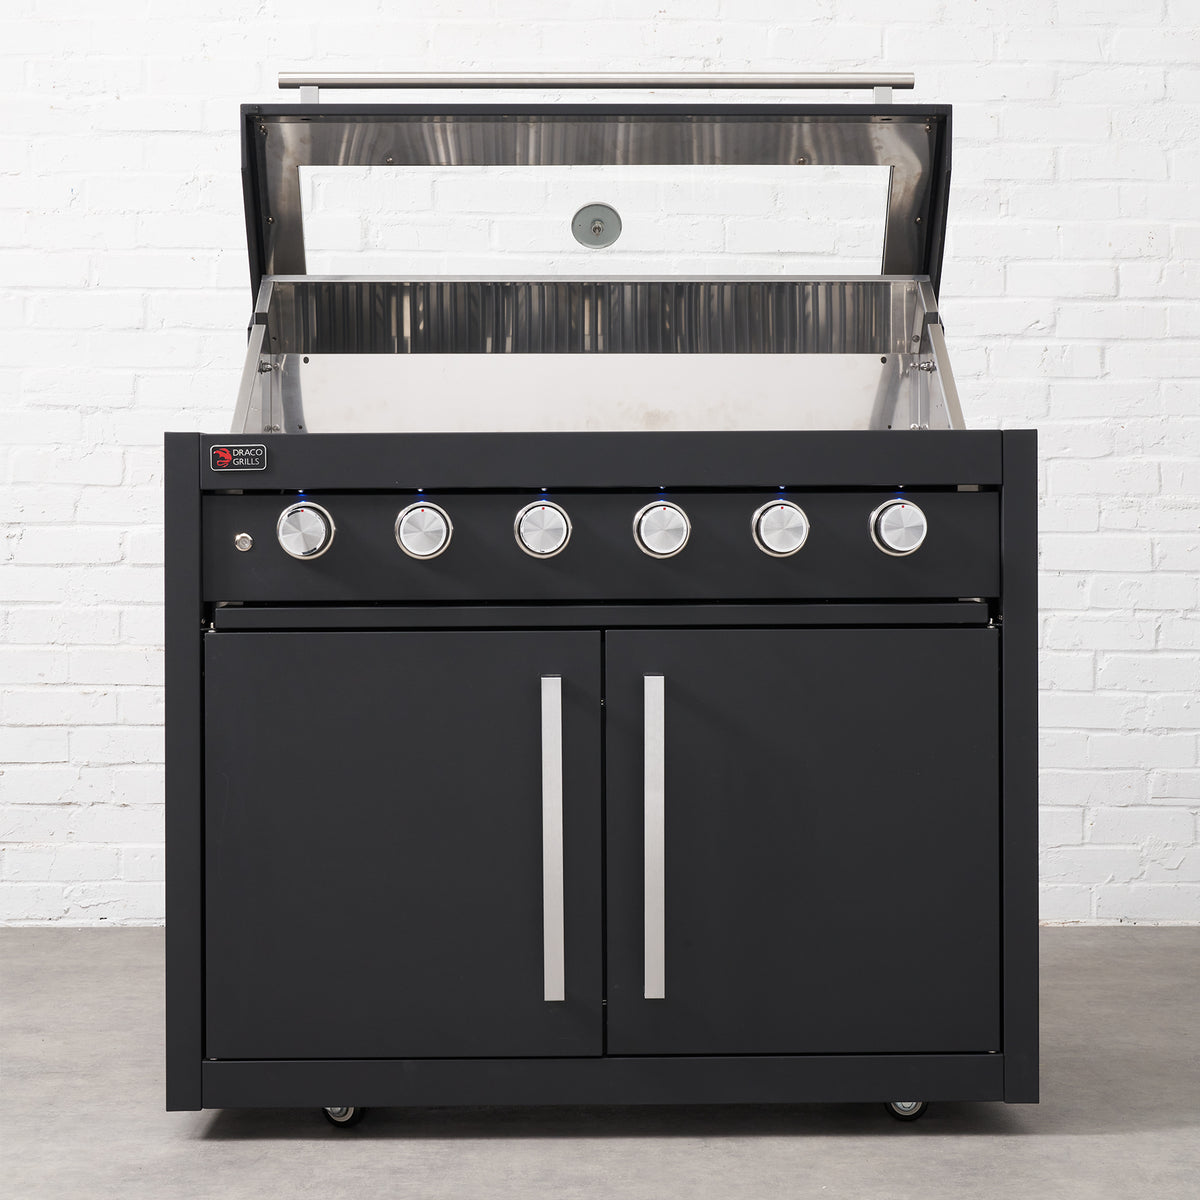 Draco Grills Fusion 6 Burner Black Outdoor Kitchen with Modular Sink and Double Cupboard